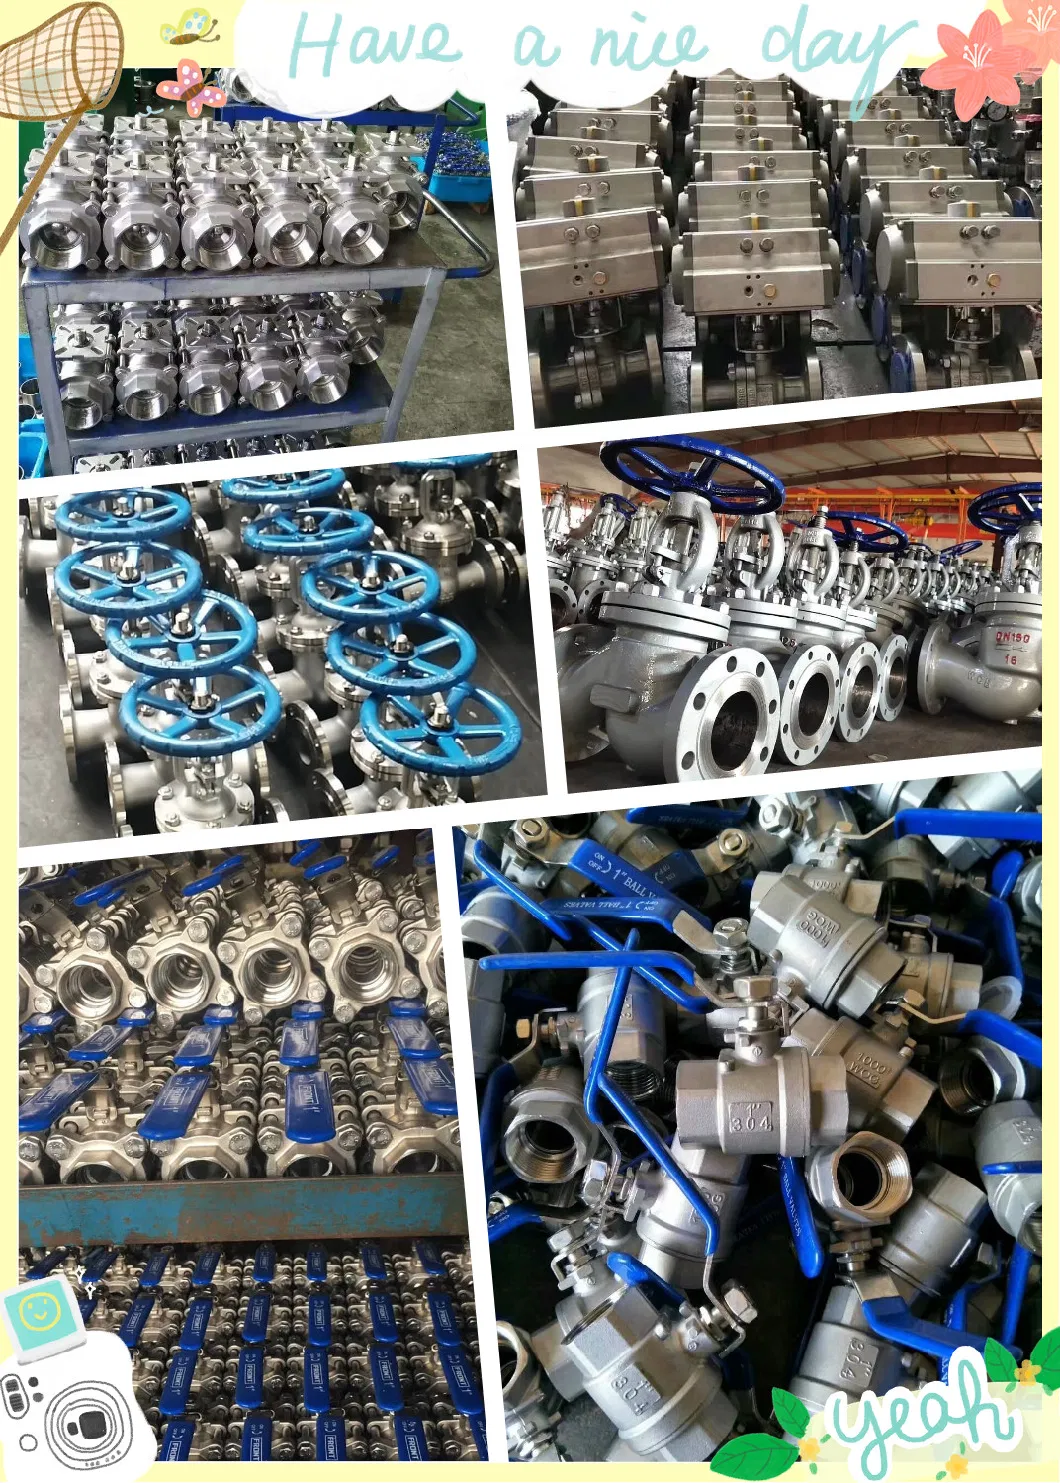 DIN/GB/GOST/BS1868 OEM Carbon/Stainless Steel Pn16/25/40 Flanged RF/Welded Bevel Gear Box Electric/Pneumatic/Hydraulic Industrial Oil Gas Water OS&Y Globe Valve